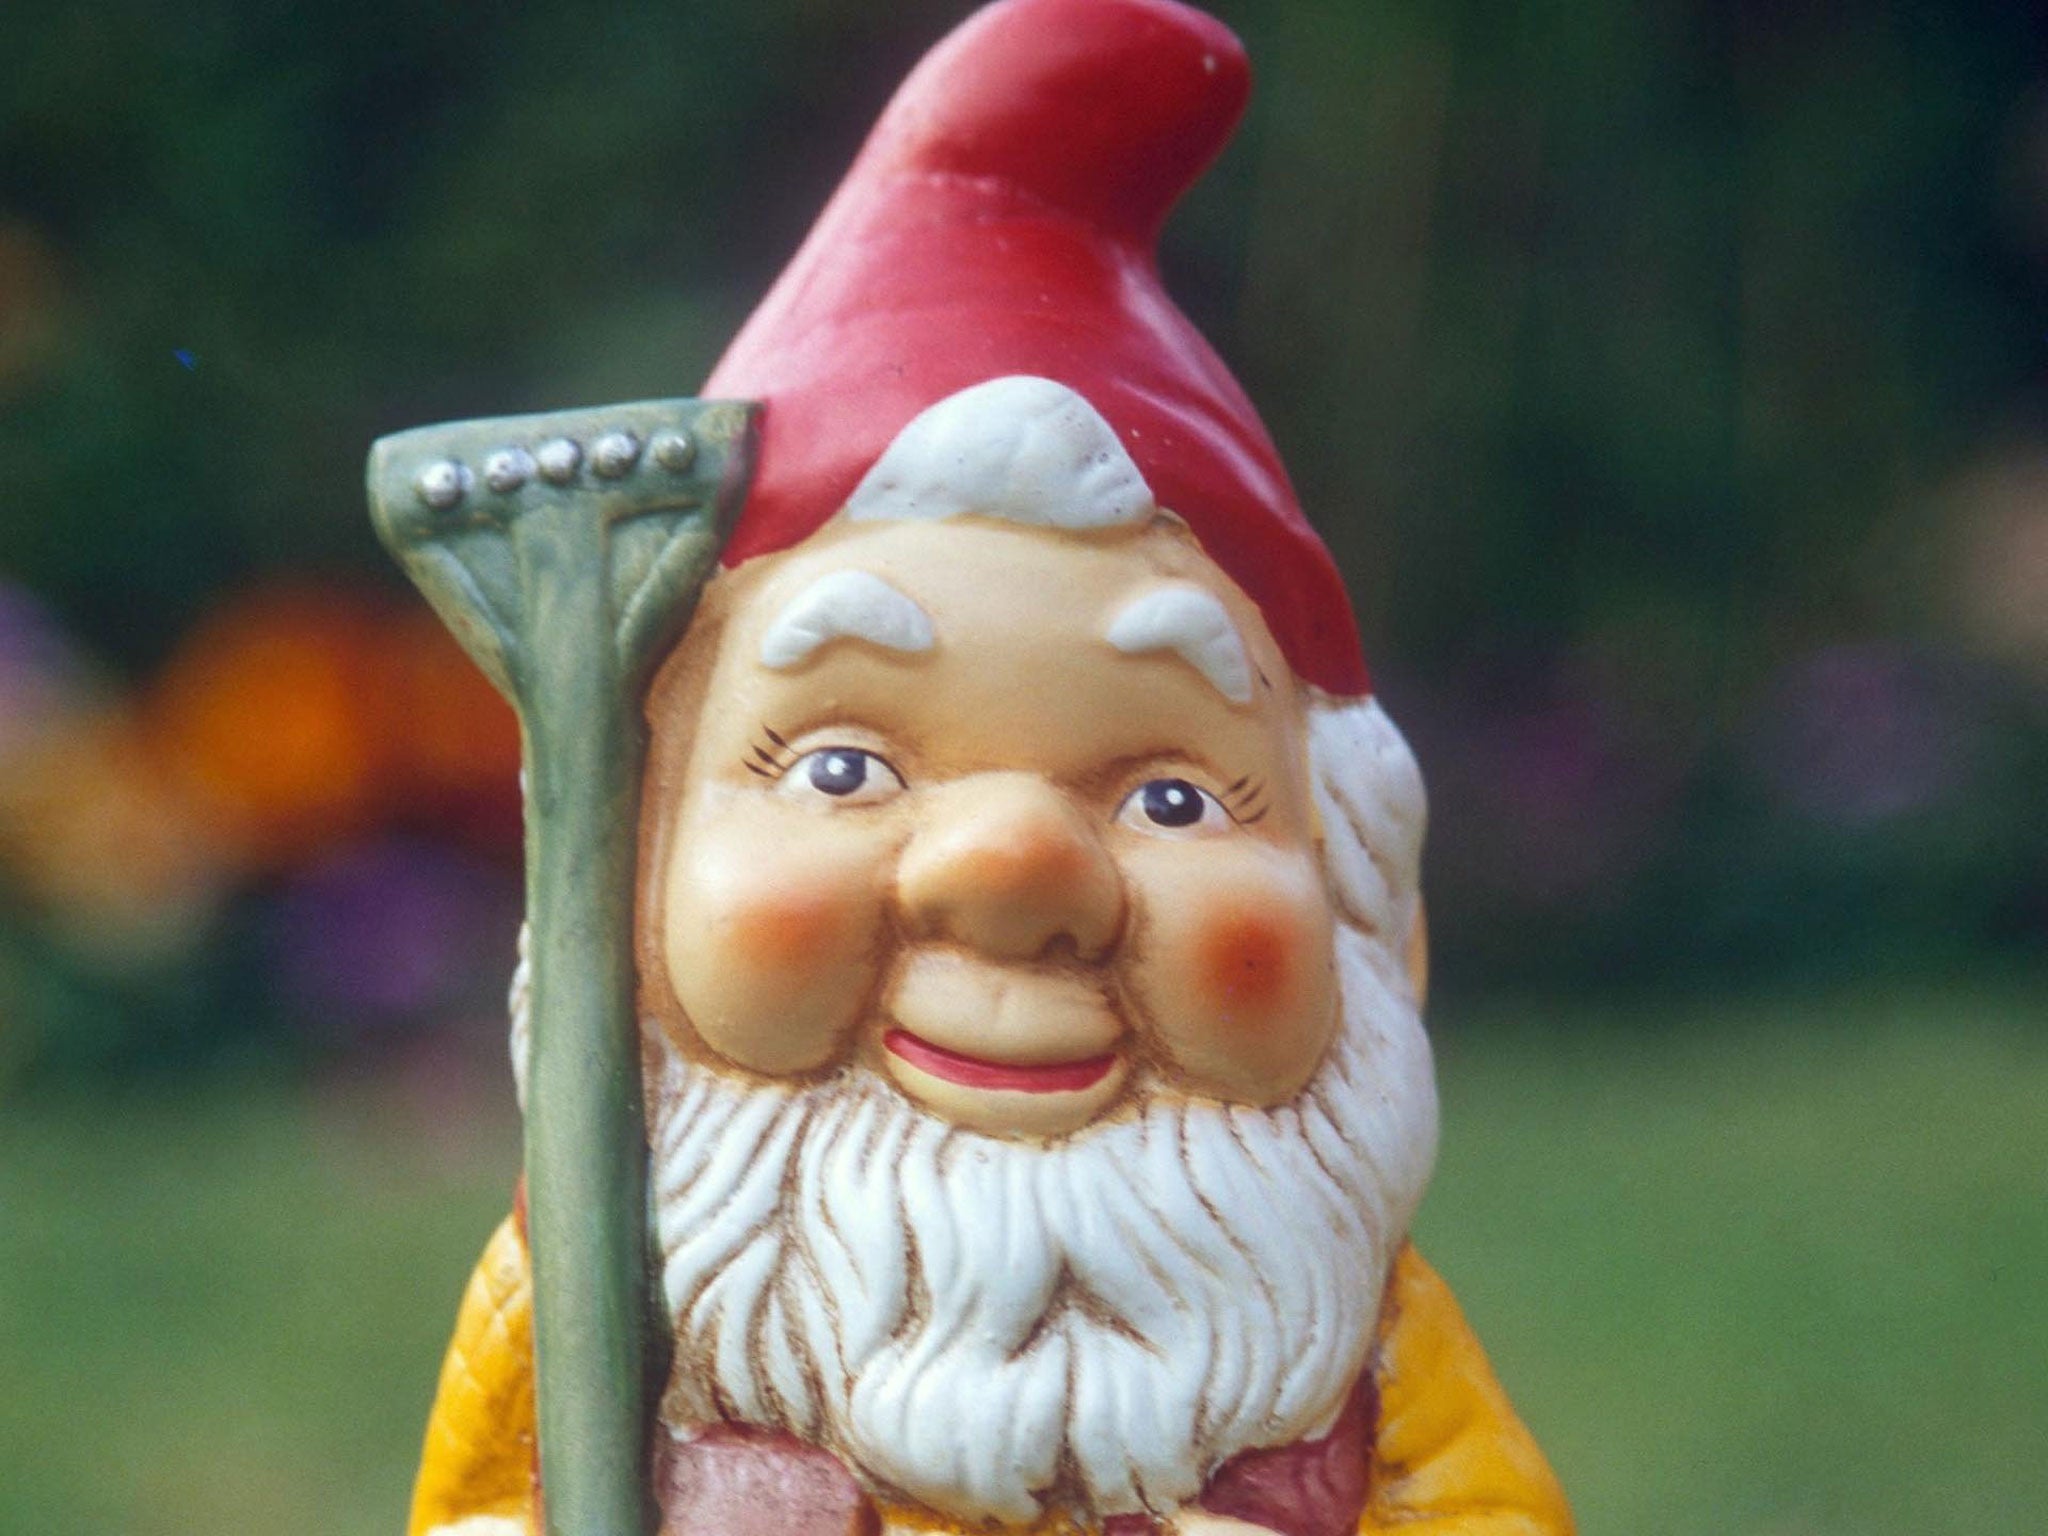 welcome gnome: kitsch garden ornaments are now allowed in to the